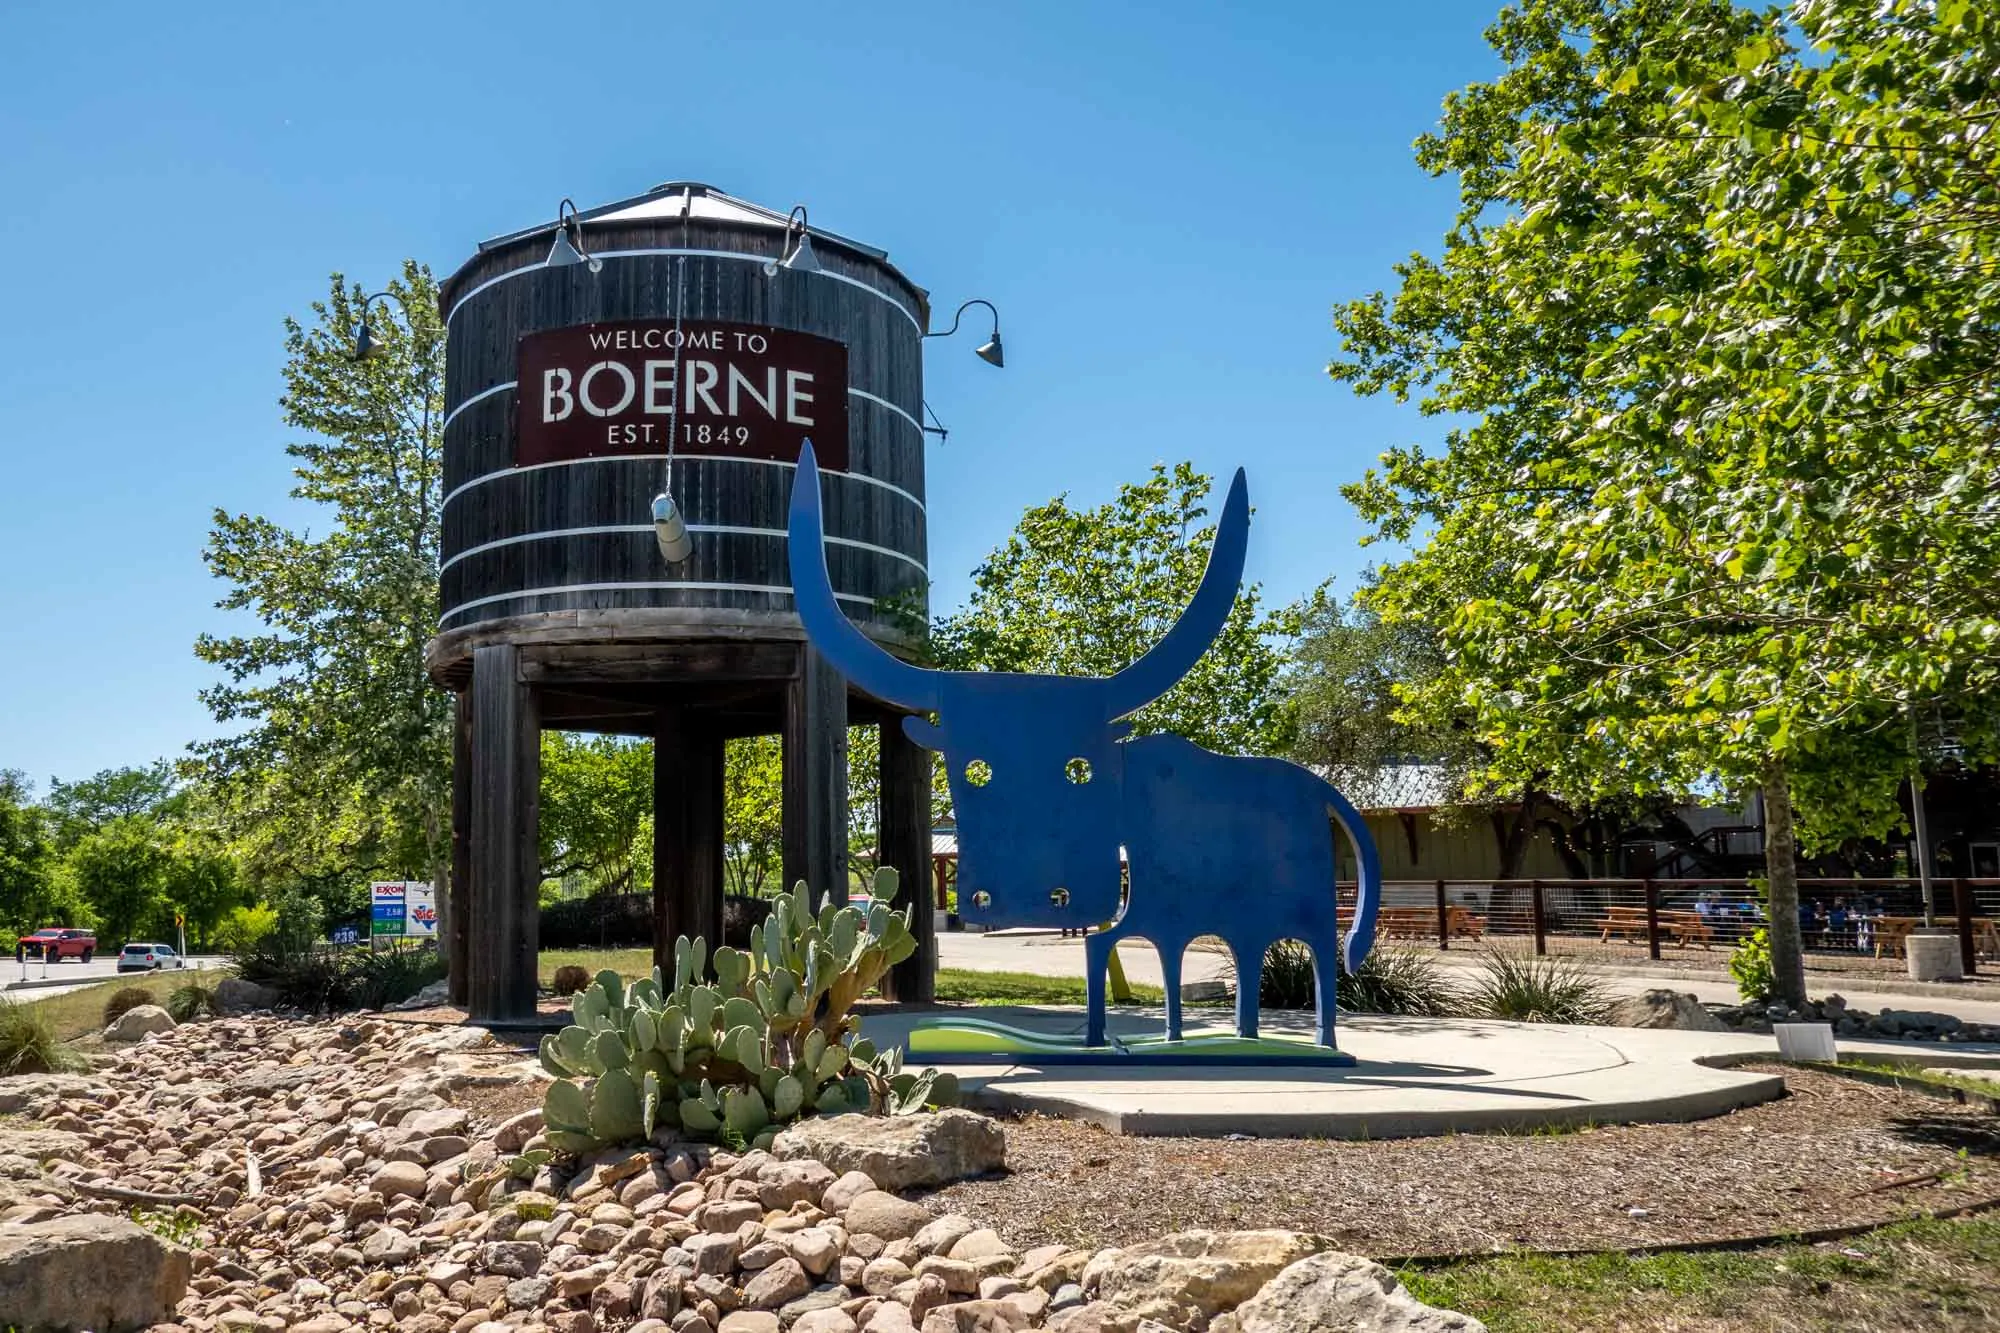 Sculpture of a blue bull with a cartooonish appearance next to a water tower with the sign "Welcome to Boerne, Est. 1849."